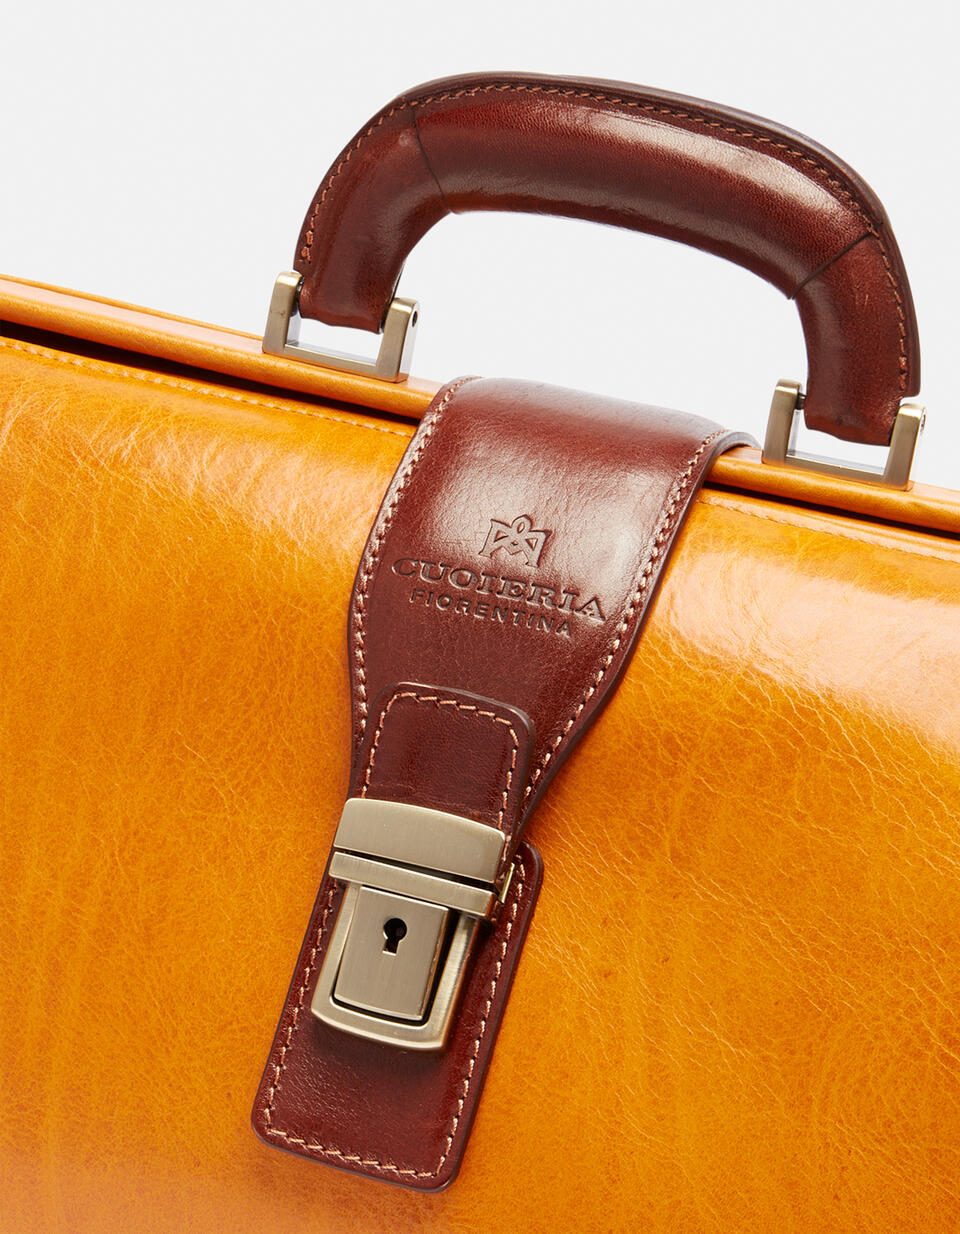 Small leather doctor's bag - Doctor Bags | Briefcases GIALLOBICOLORE - Doctor Bags | BriefcasesCuoieria Fiorentina